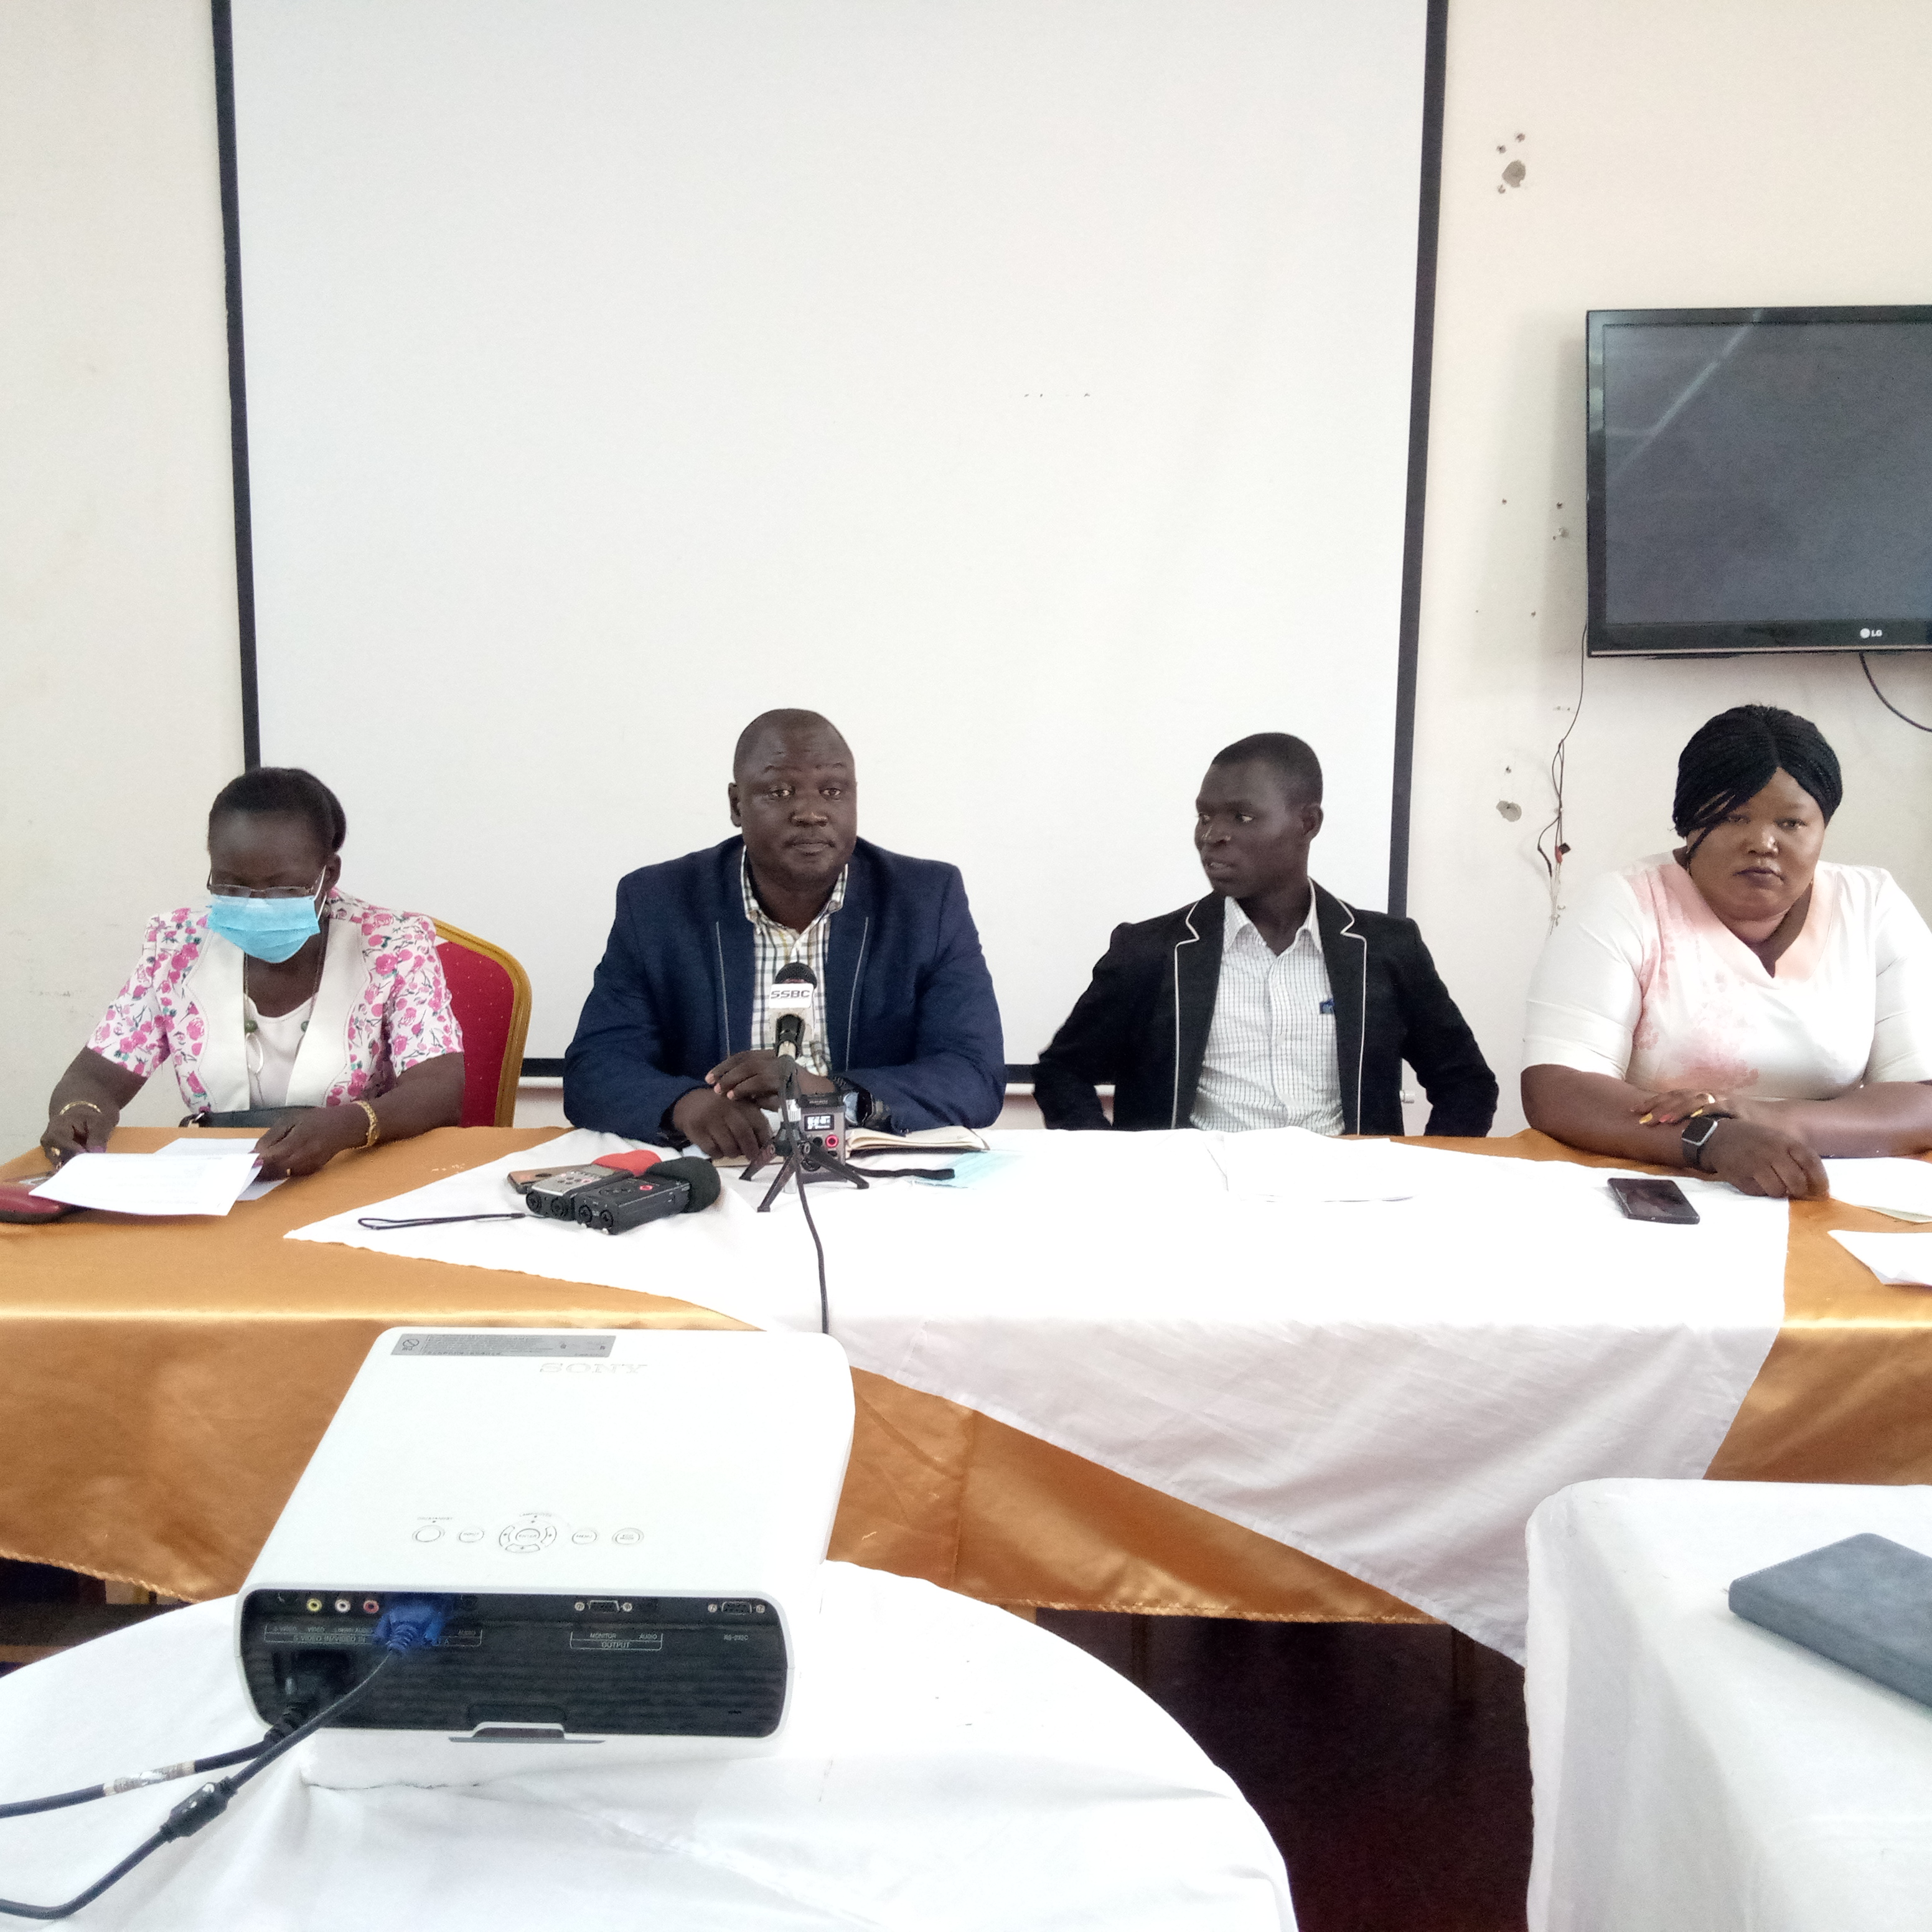 Security stops media stakeholders presser on inclusive constitution-making process